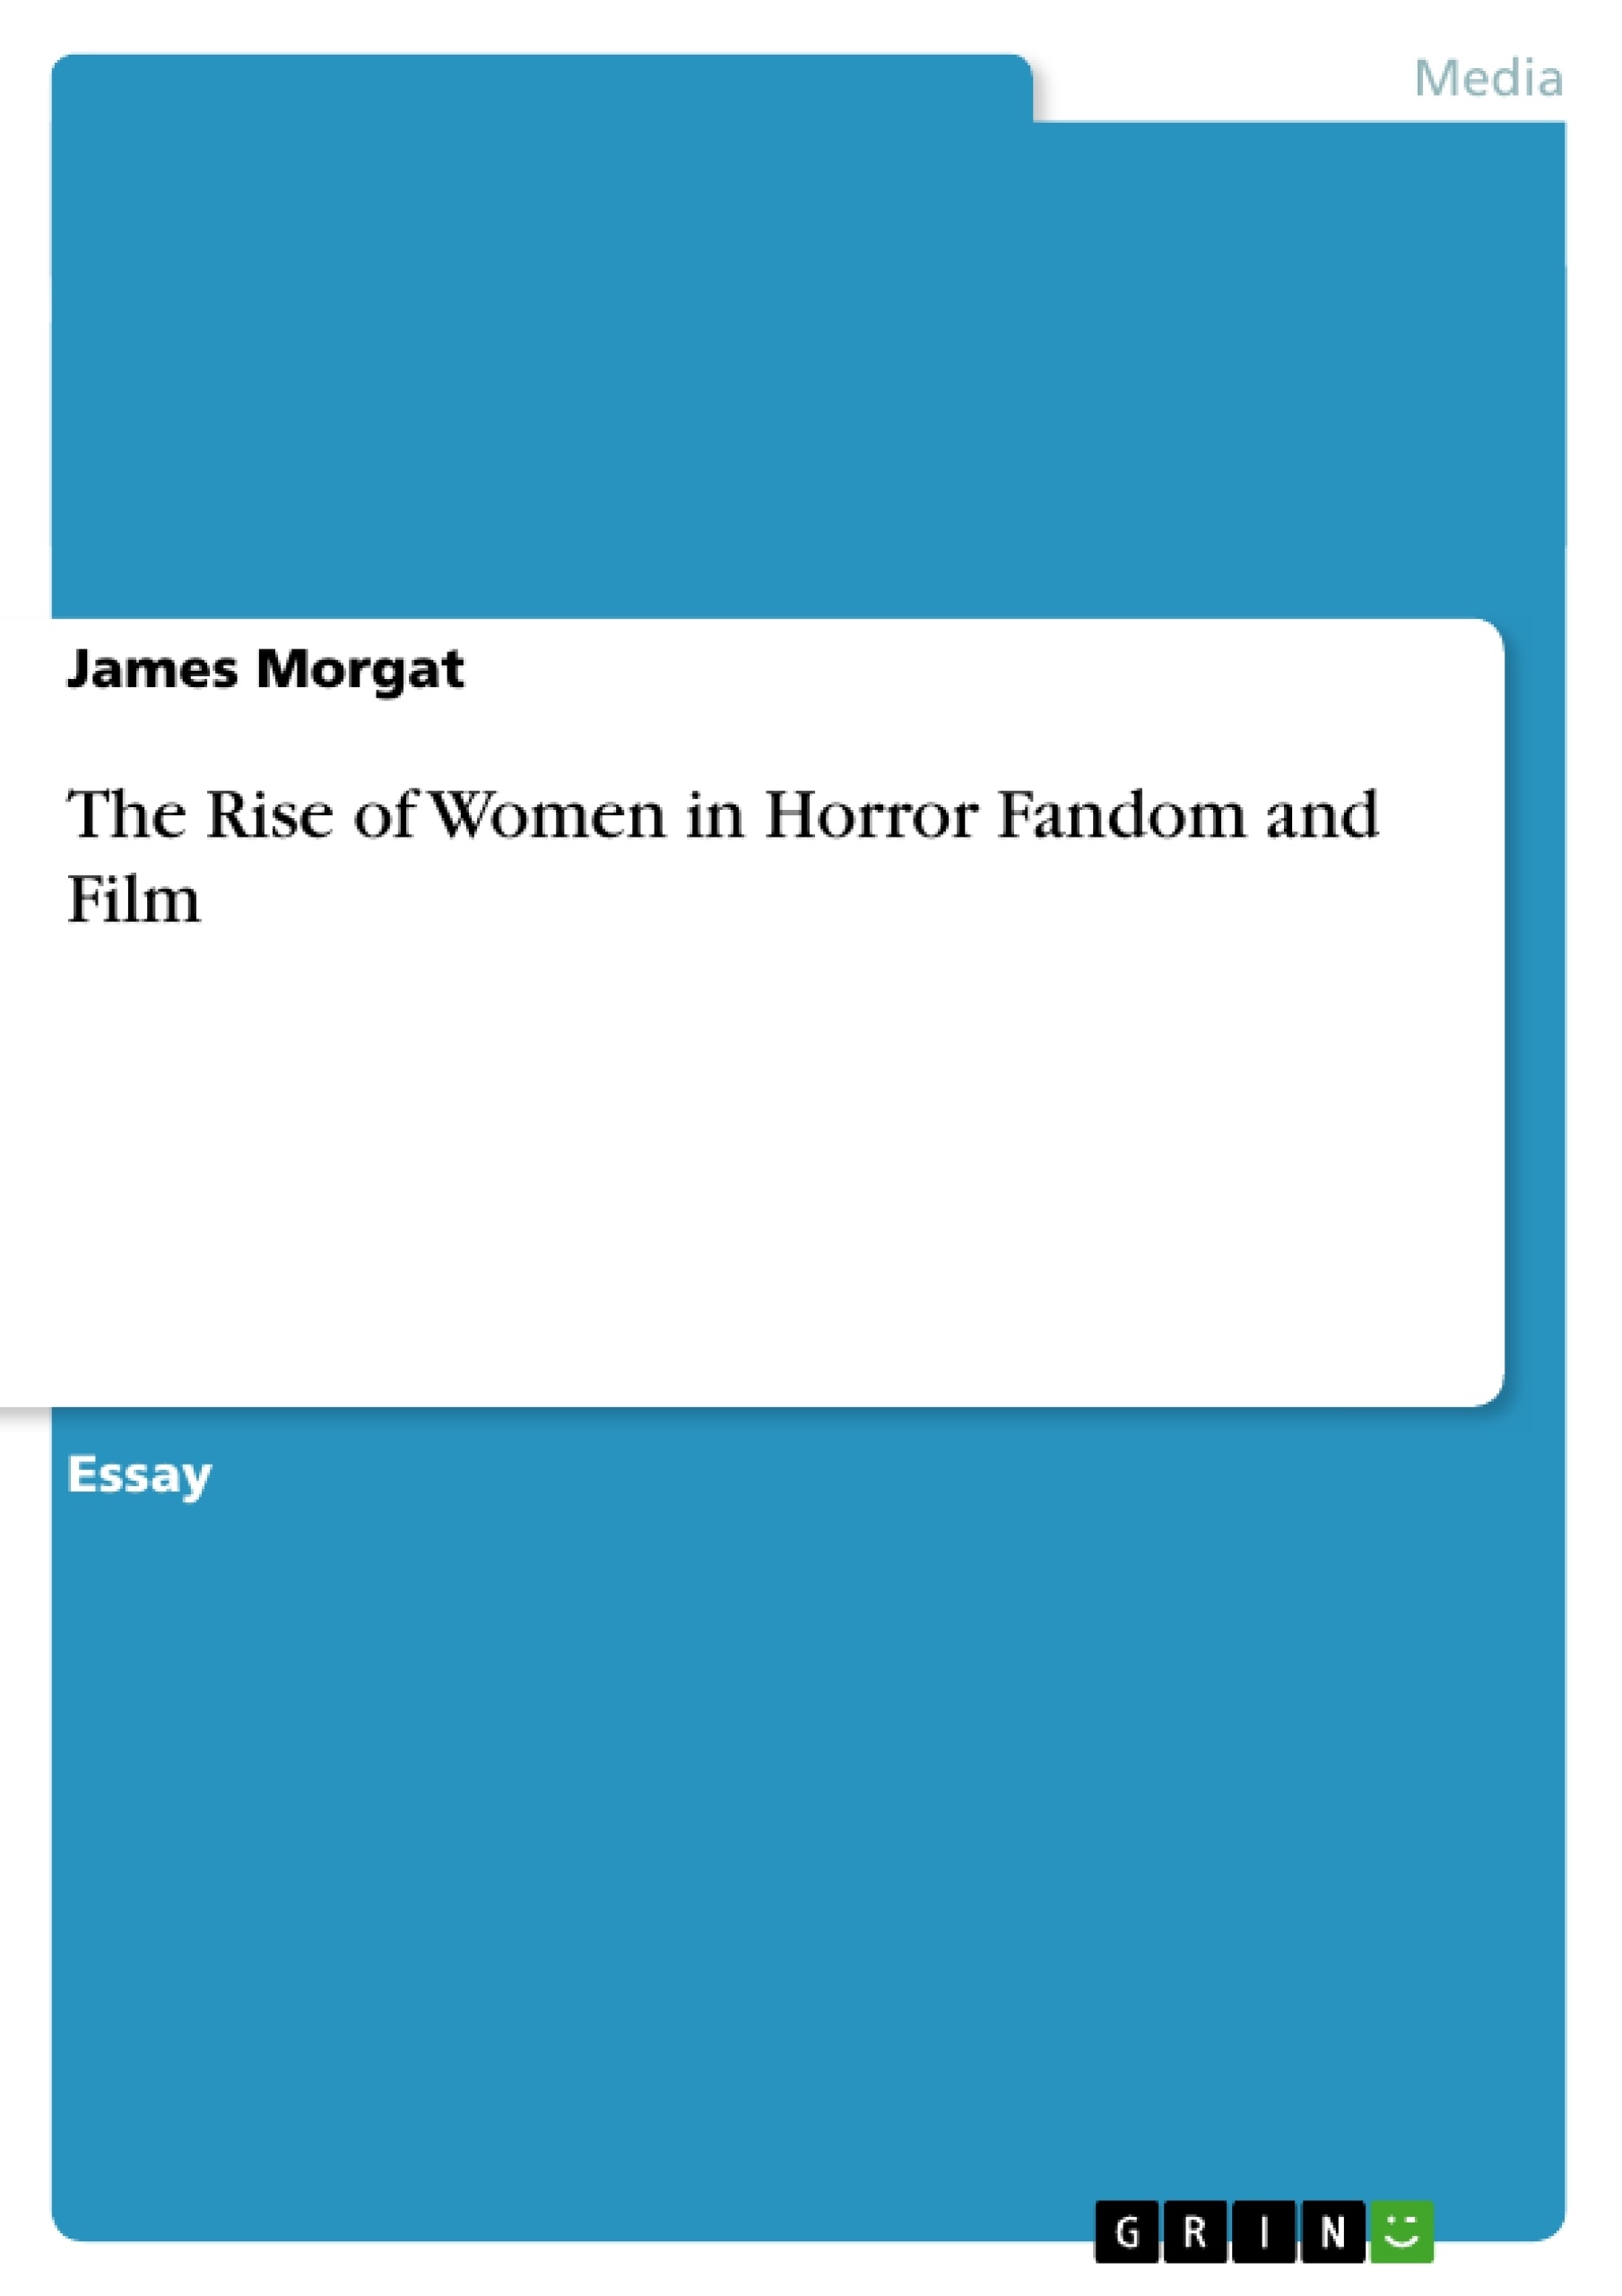 Title: The Rise of Women in Horror Fandom and Film